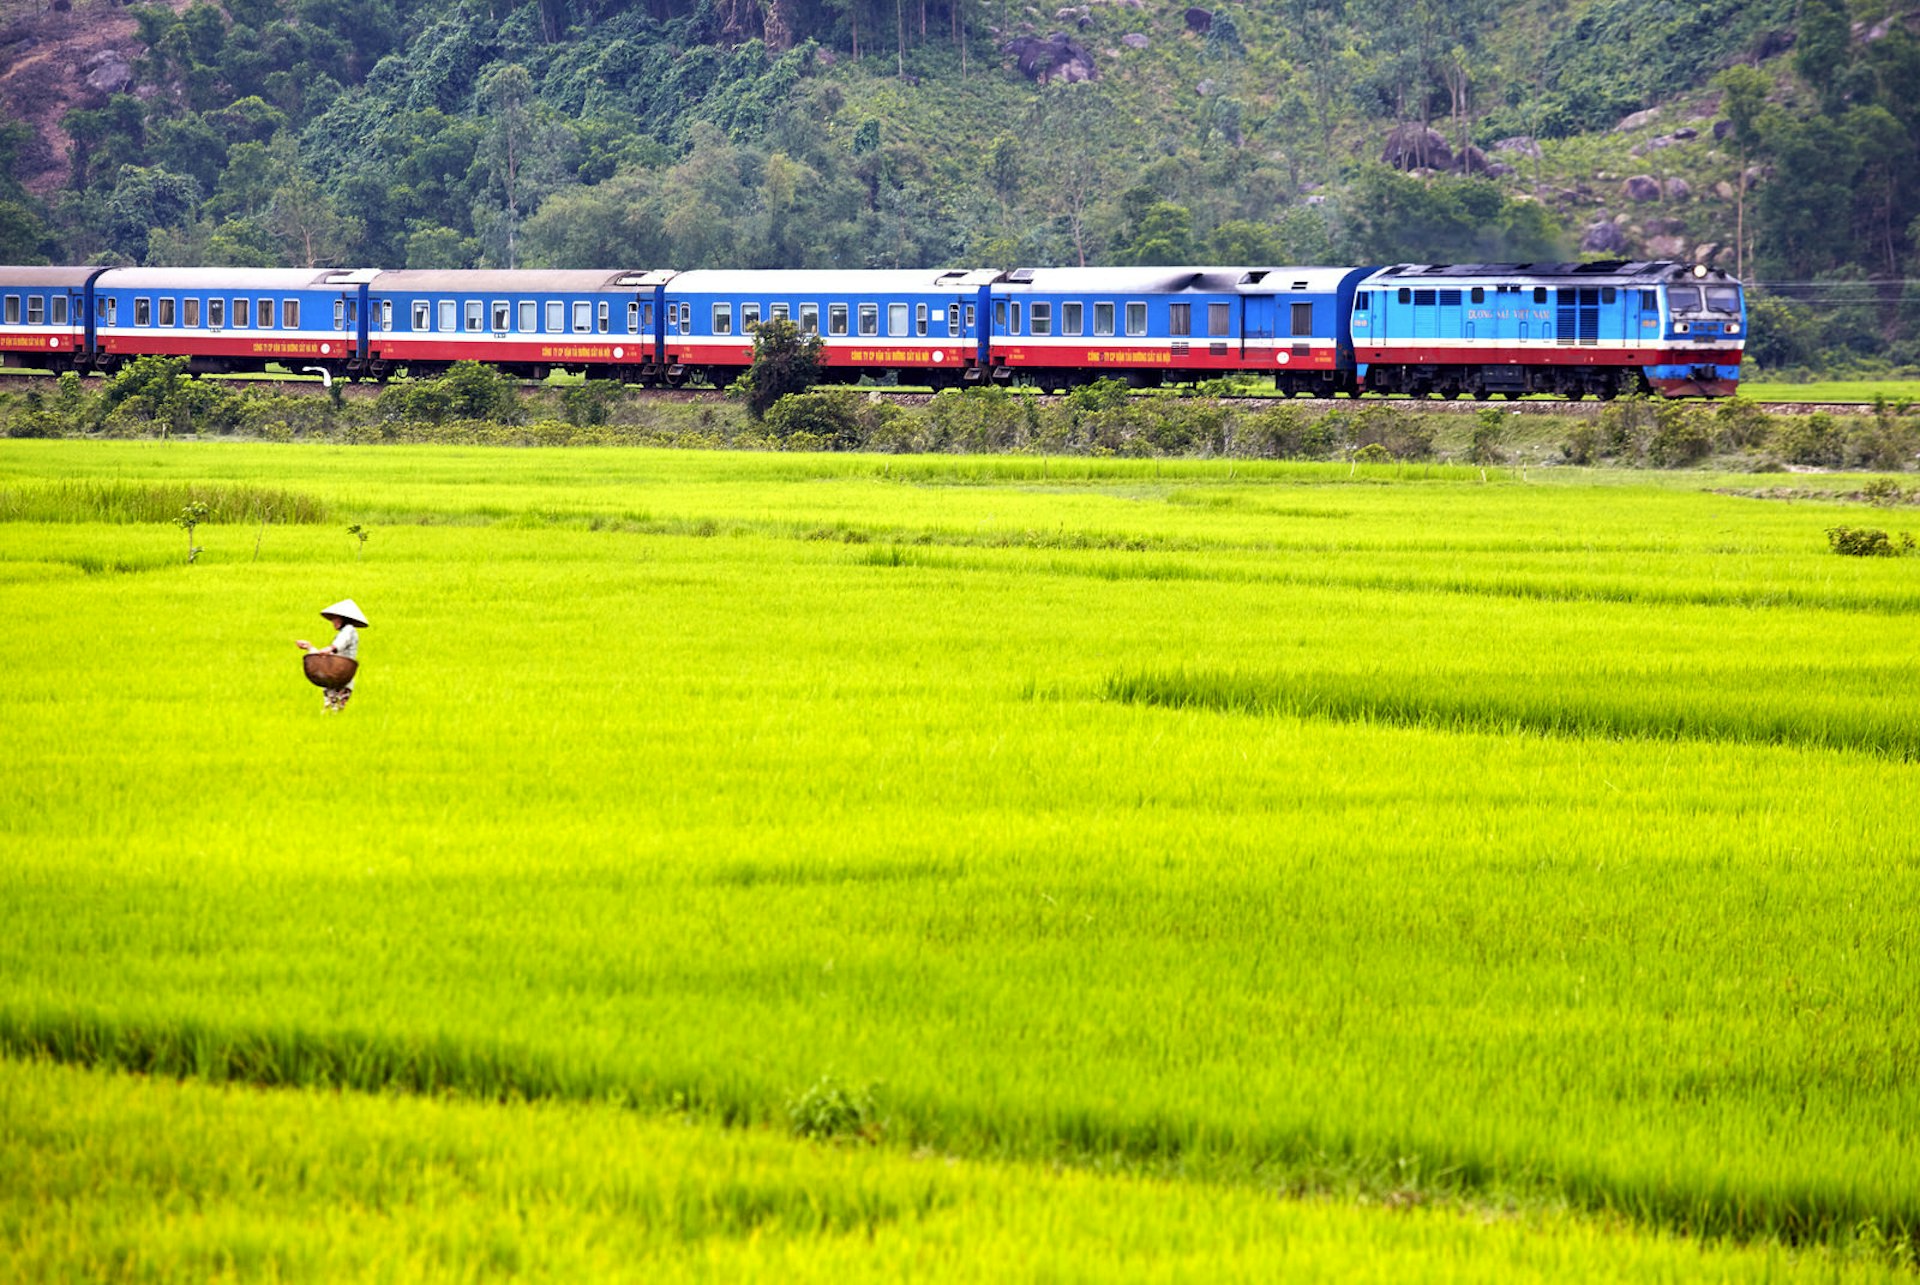 The Reunification Express speeding past rice paddies between Hue and Hoi An © Matt Munro / Lonely Planet